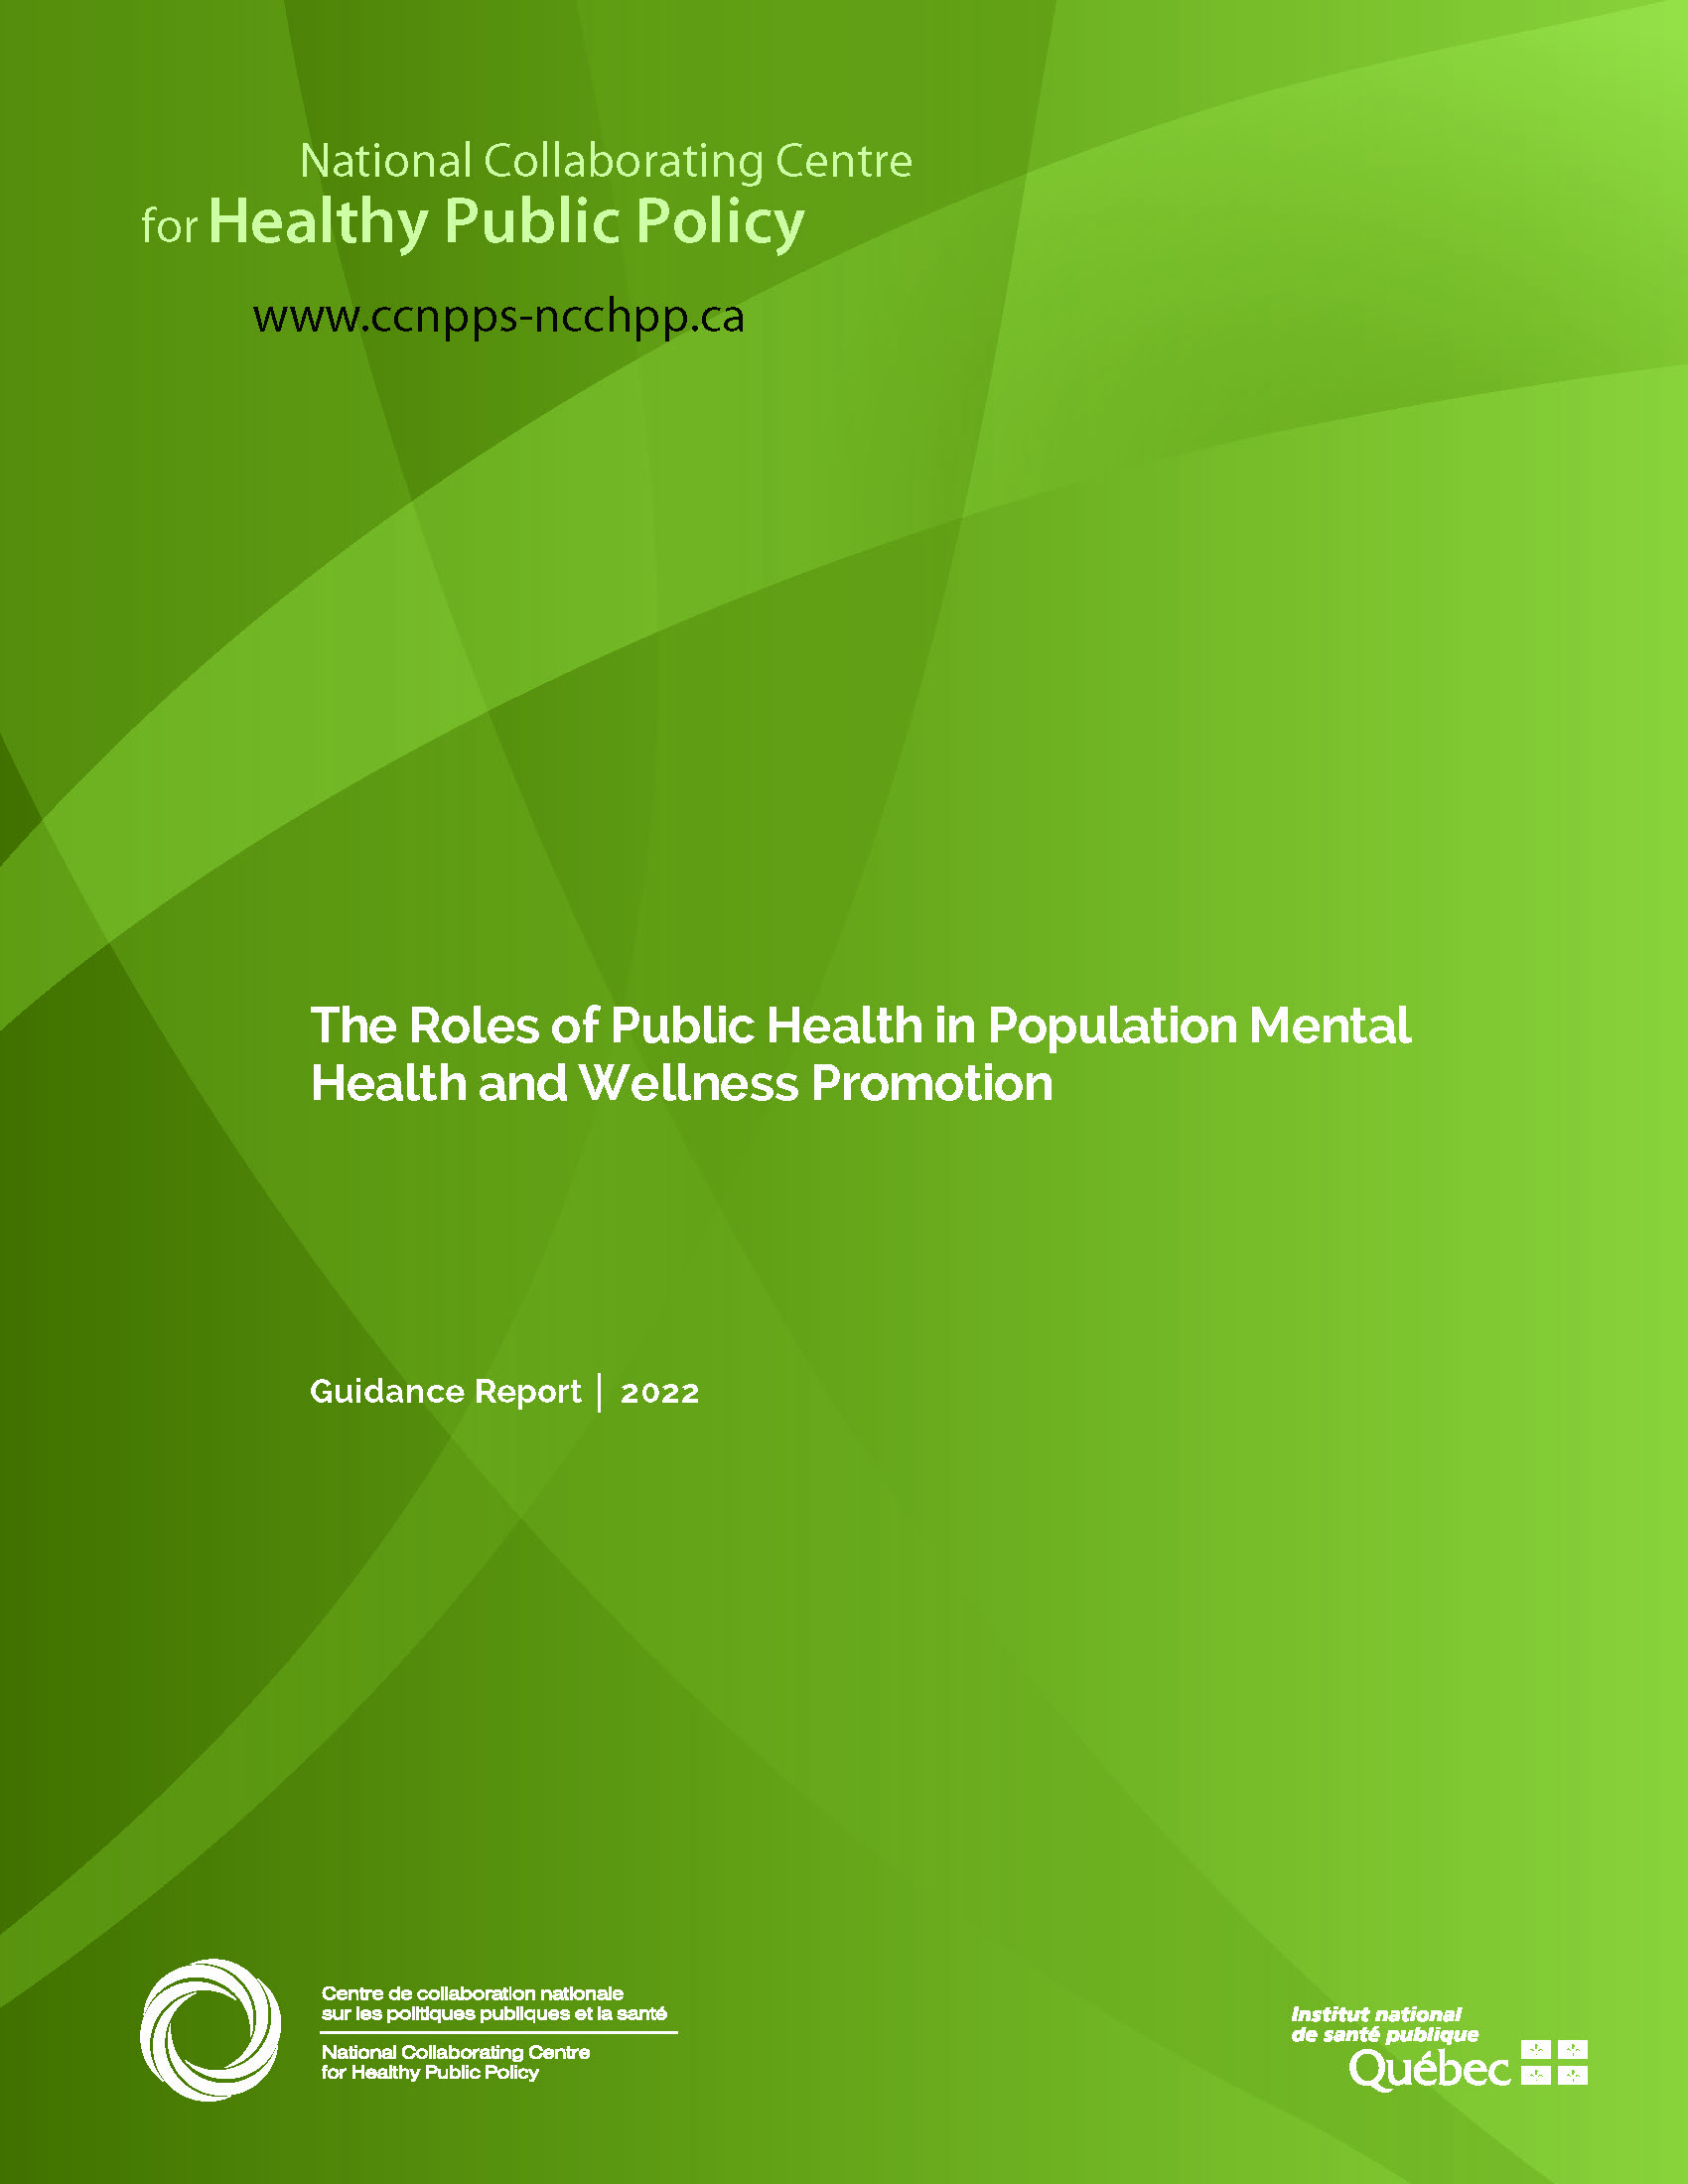 The Roles of Public Health in Population Mental Health and Wellness Promotion